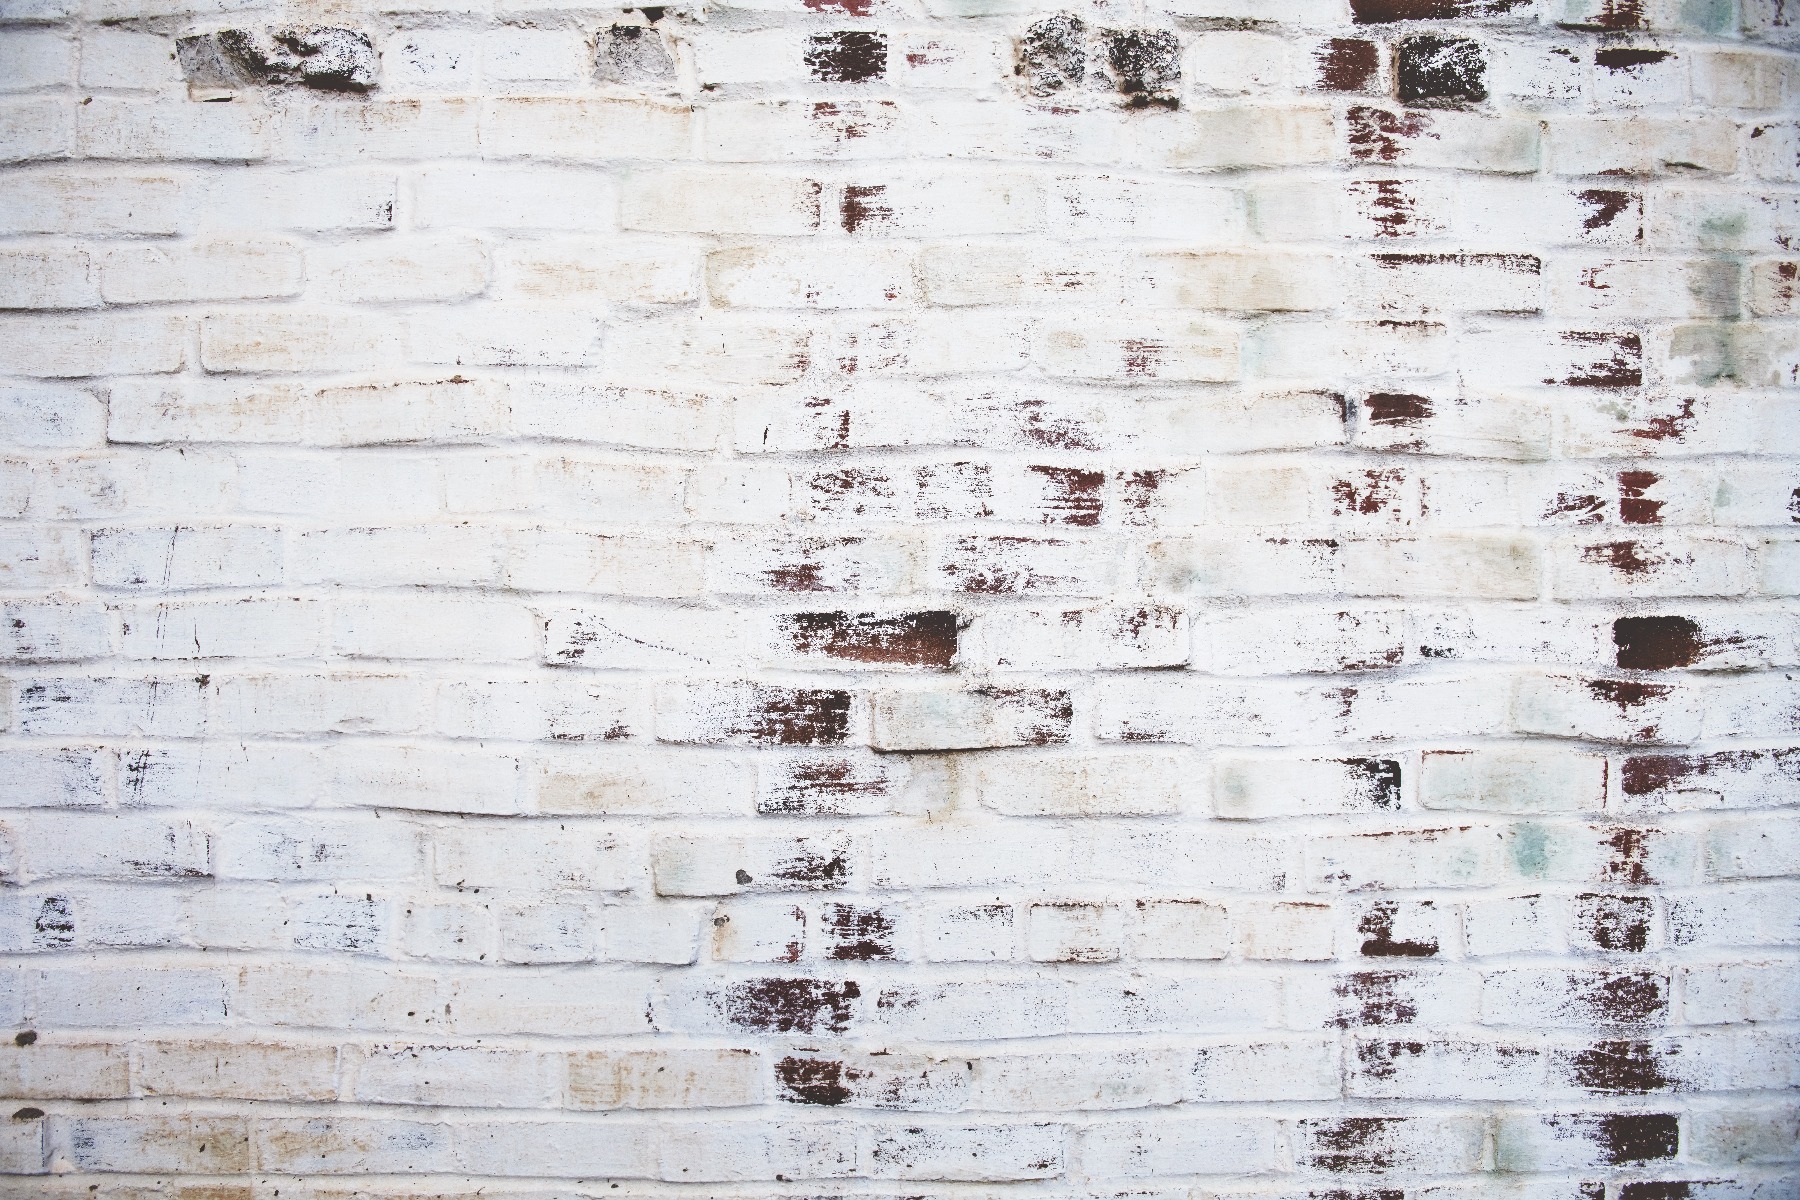 Arthouse Whitewashed White Brick Wallpaper  Photographic Design  3D  Effect  Realistic Rustic Brick  Urban Industrial Loft Effect  Paste The  Paper  Easy to Hang  10m  328ft Roll  671100  Amazoncouk DIY   Tools